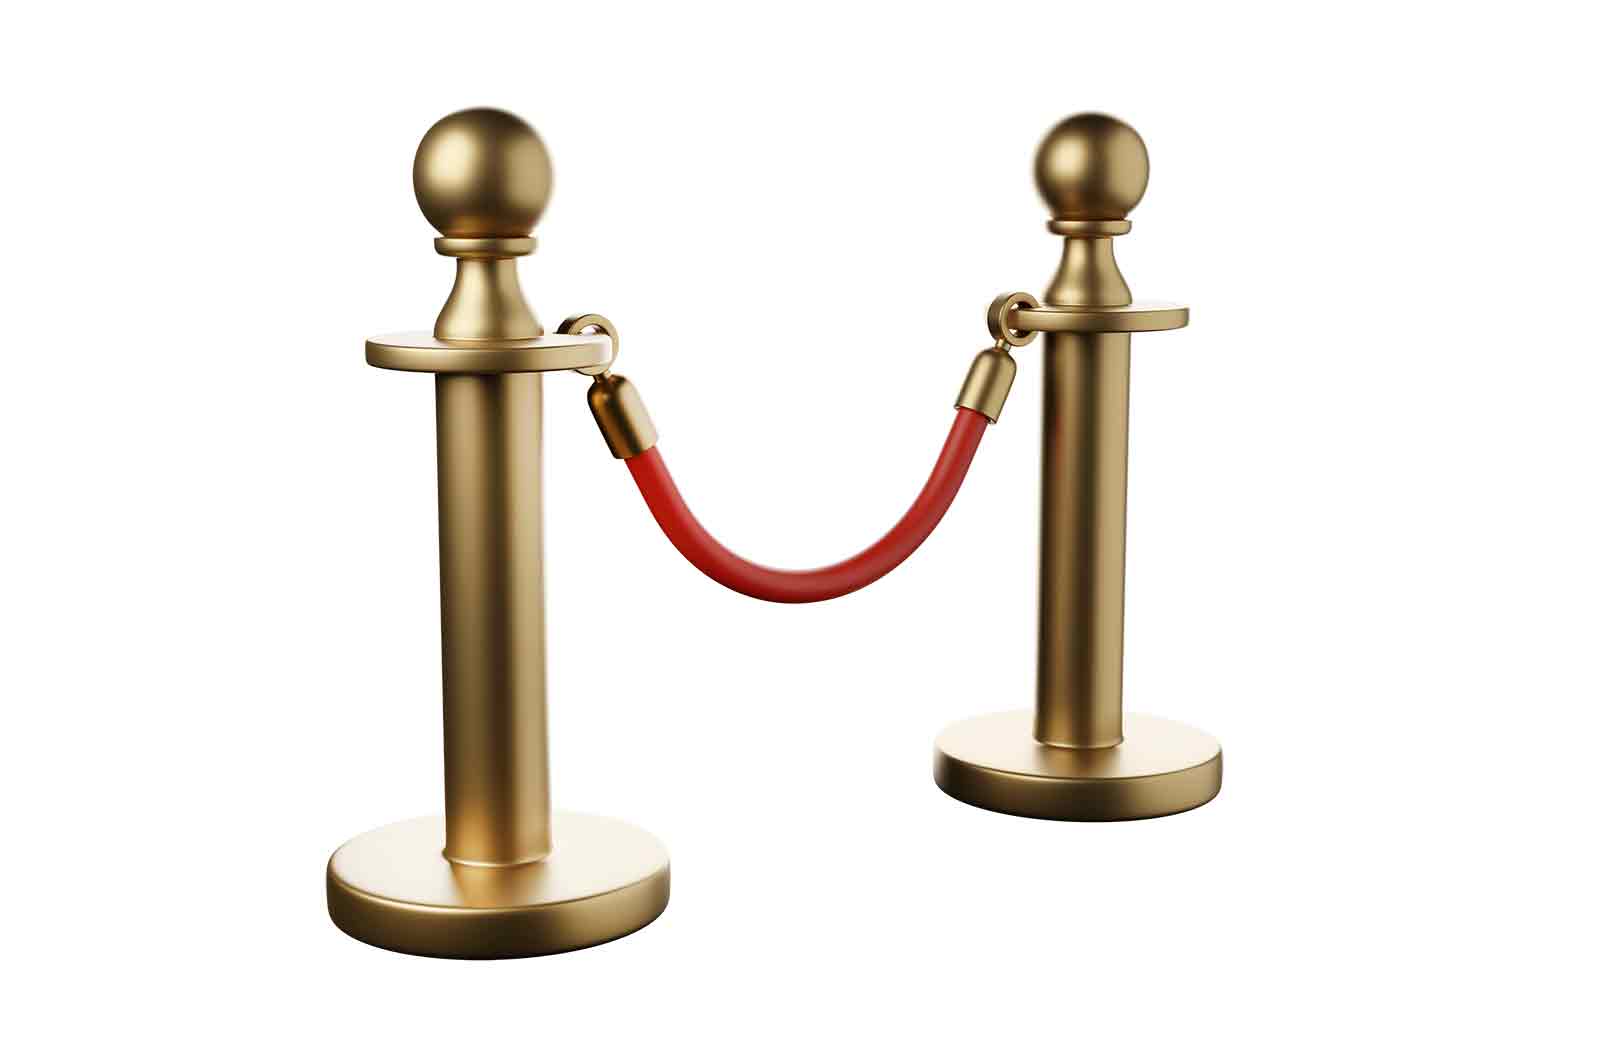 Barrier with rope and gold poles 3d rendered illustration. Fence for red carpet or vip event, museum or gallery stanchion, night club entrance security fencing